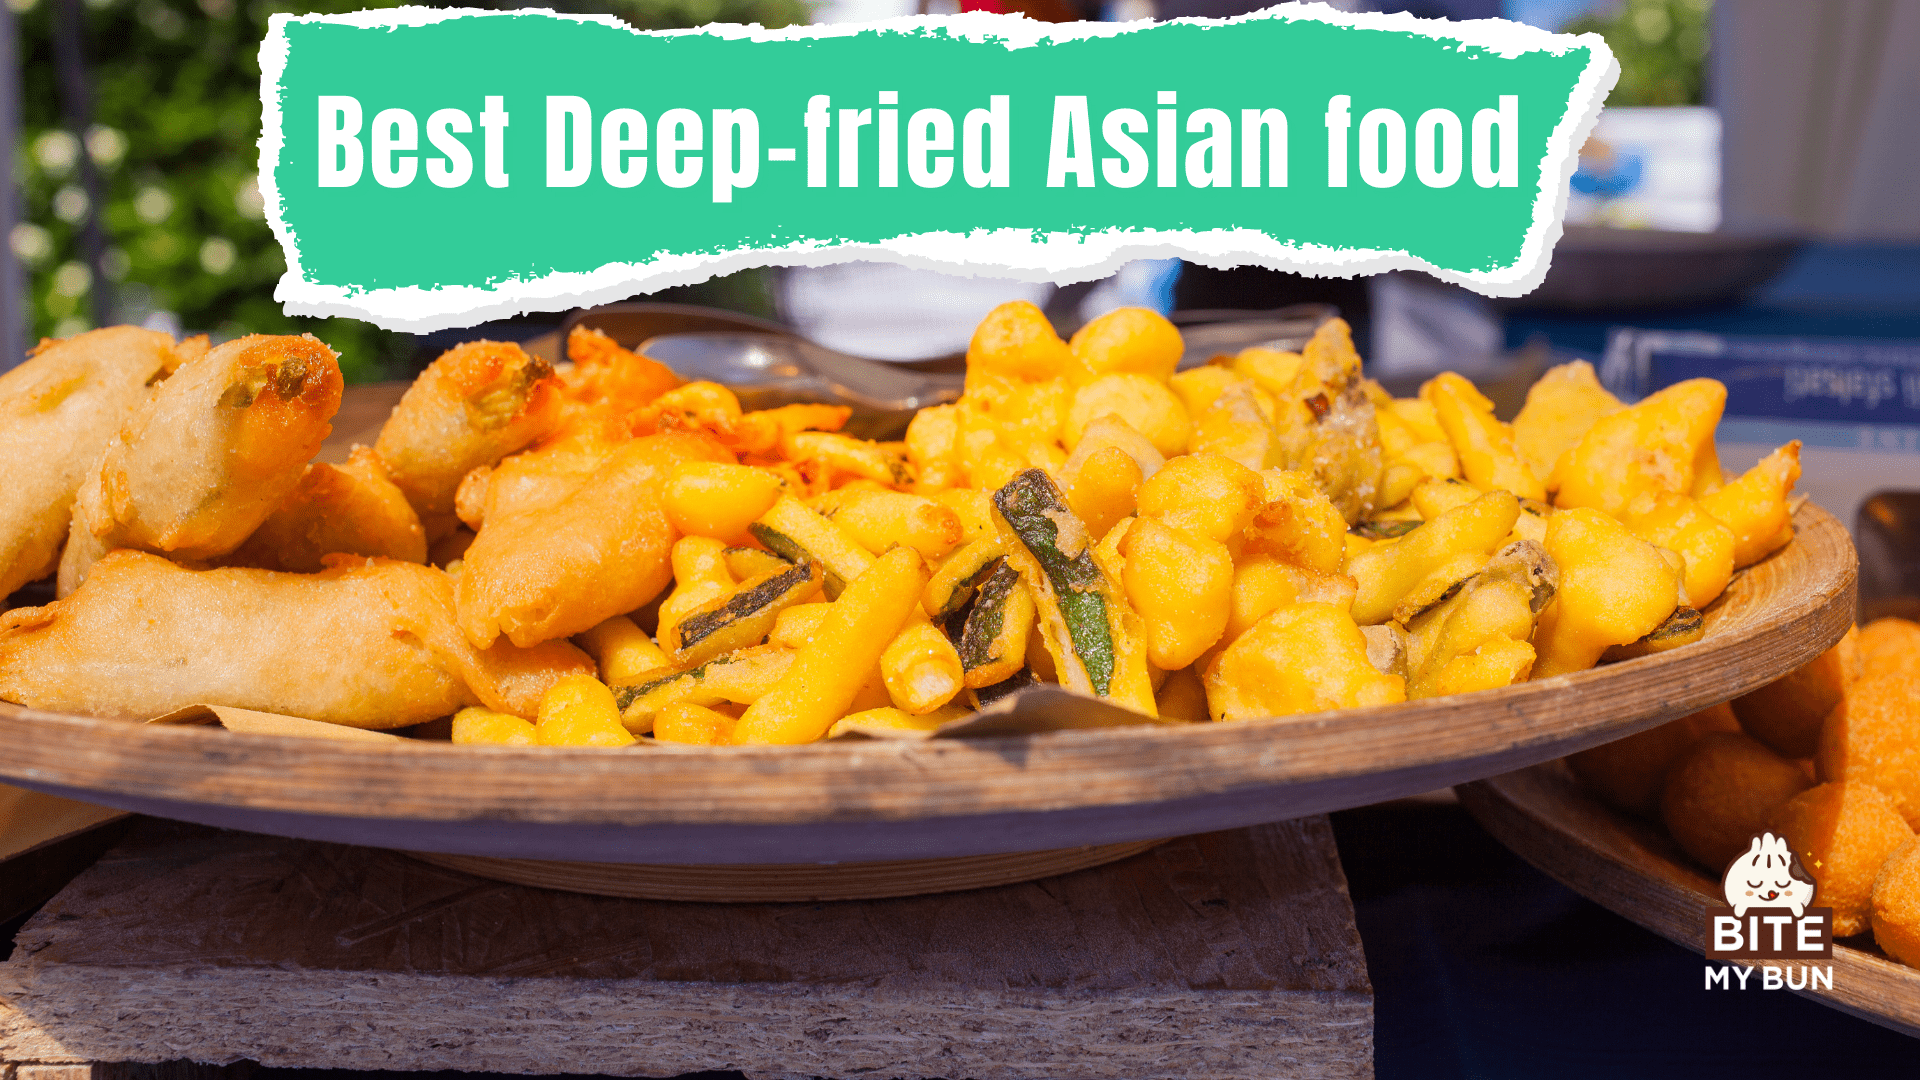 Deep-fried Asian food | The secret to what makes it so good